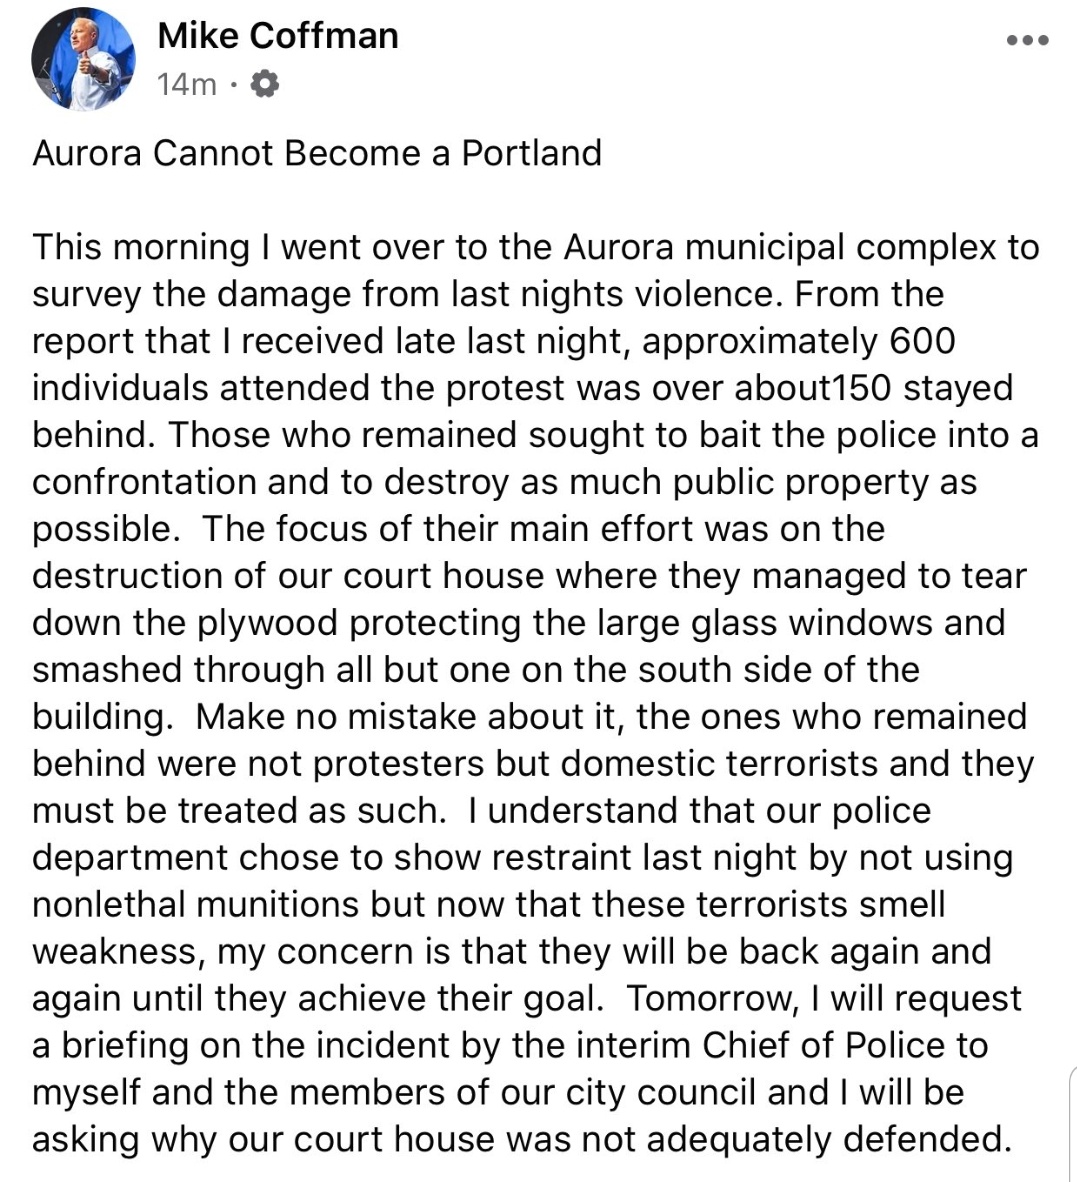  @AuroraMayorMike has since encouraged the harrassment of protestors by branding them as "Terrorists"! @da17colorado continues to ignore the will of the people, instead protecting the malicious actions of officers & political aggressors!(3/6) #ElijahMcClainWasMurdered